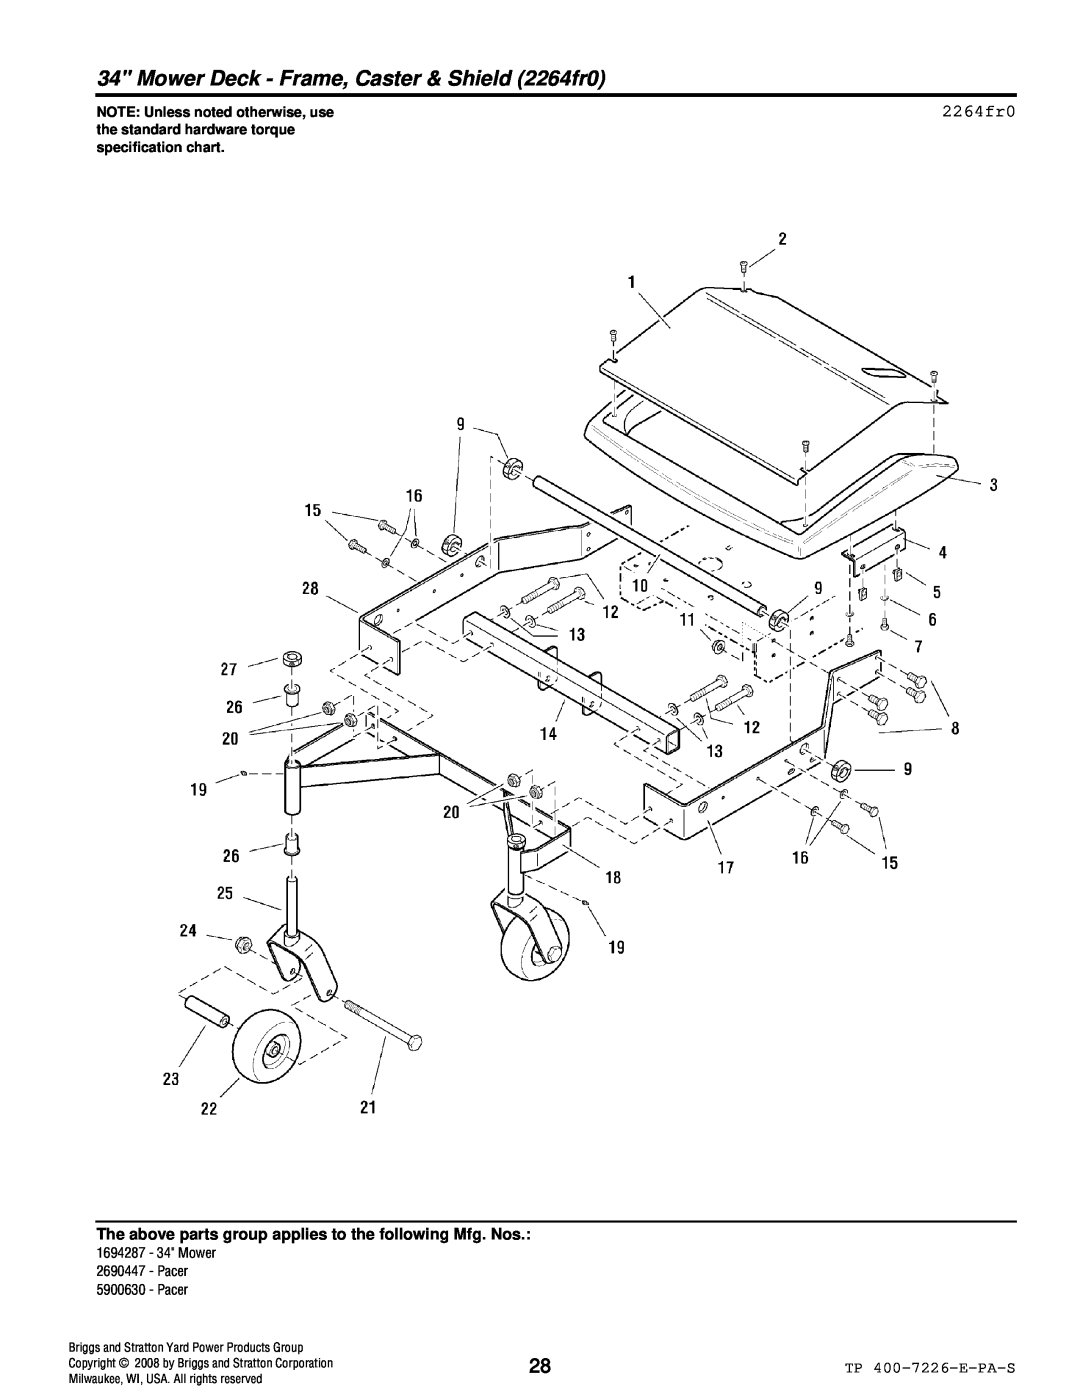 Simplicity Pacer manual Mower Deck - Frame, Caster & Shield 2264fr0, NOTE Unless noted otherwise, use 